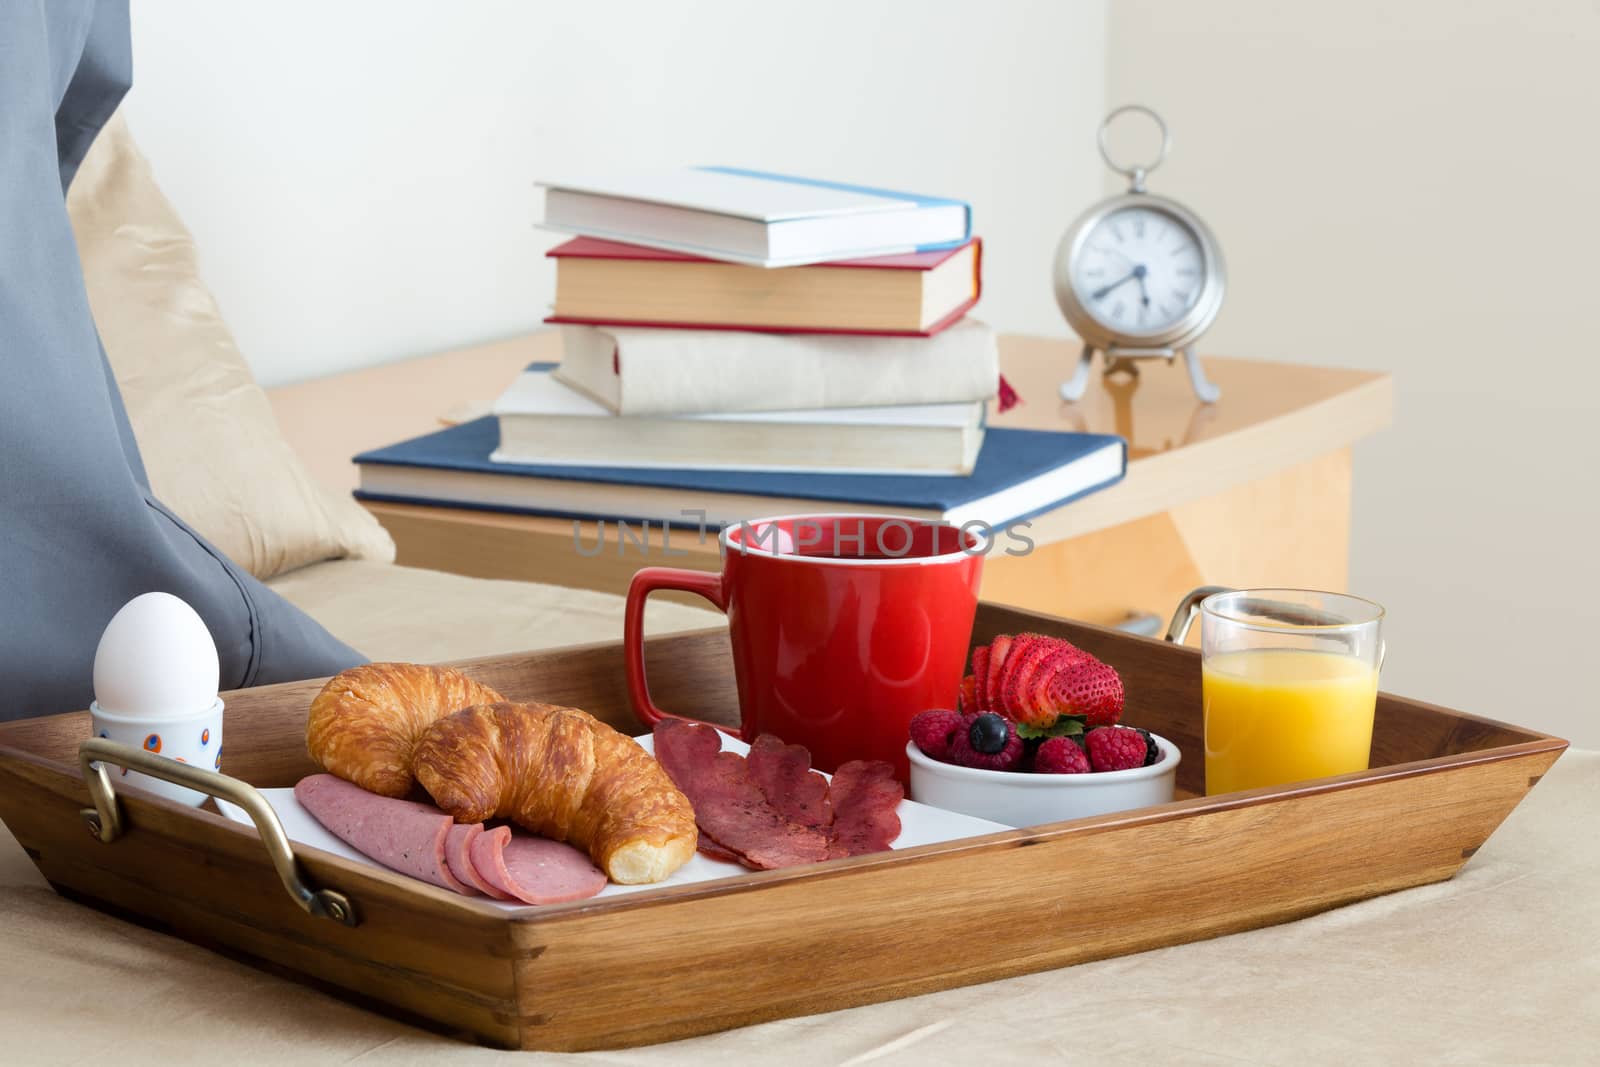 Close Up of Breakfast in Bed, Wooden Tray with Assortment of Appetizing Food Resting on Bed Next to Bedside Table Stacked with Books and Alarm Clock